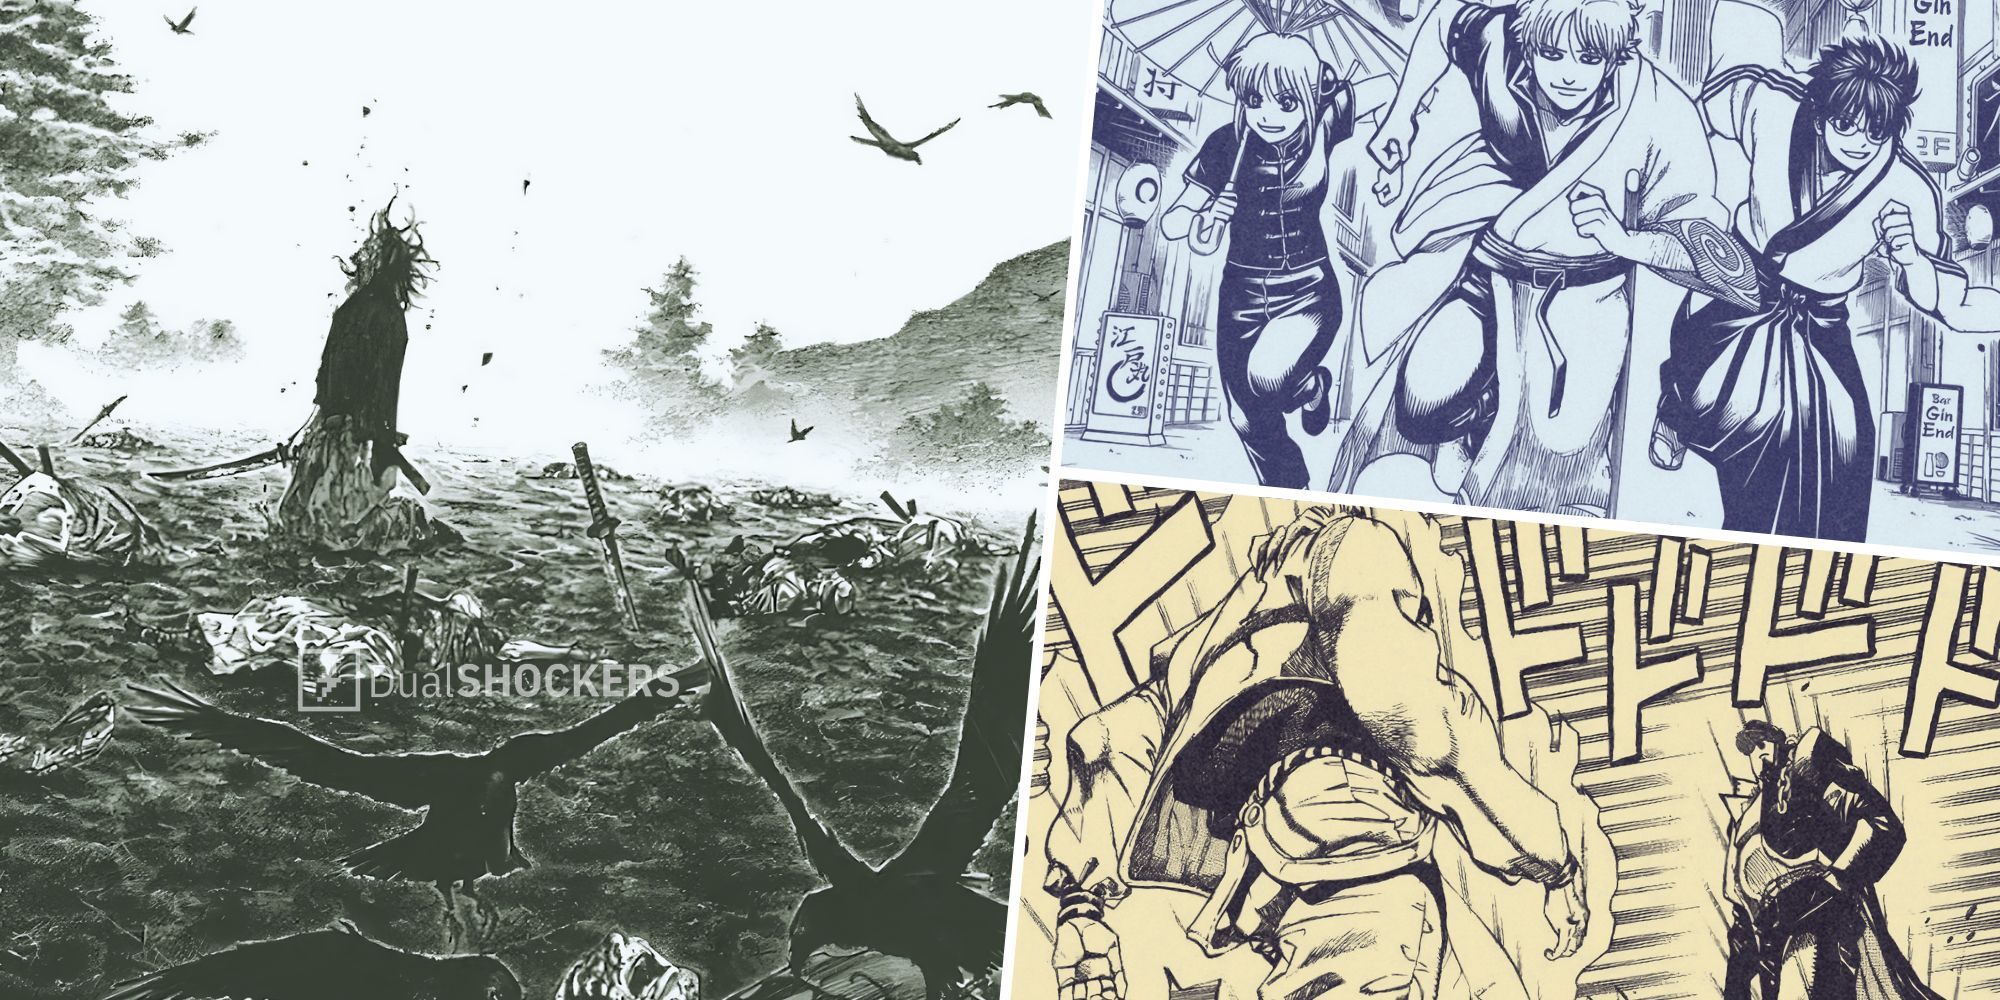 Best Manga Panels Of All time, ranked